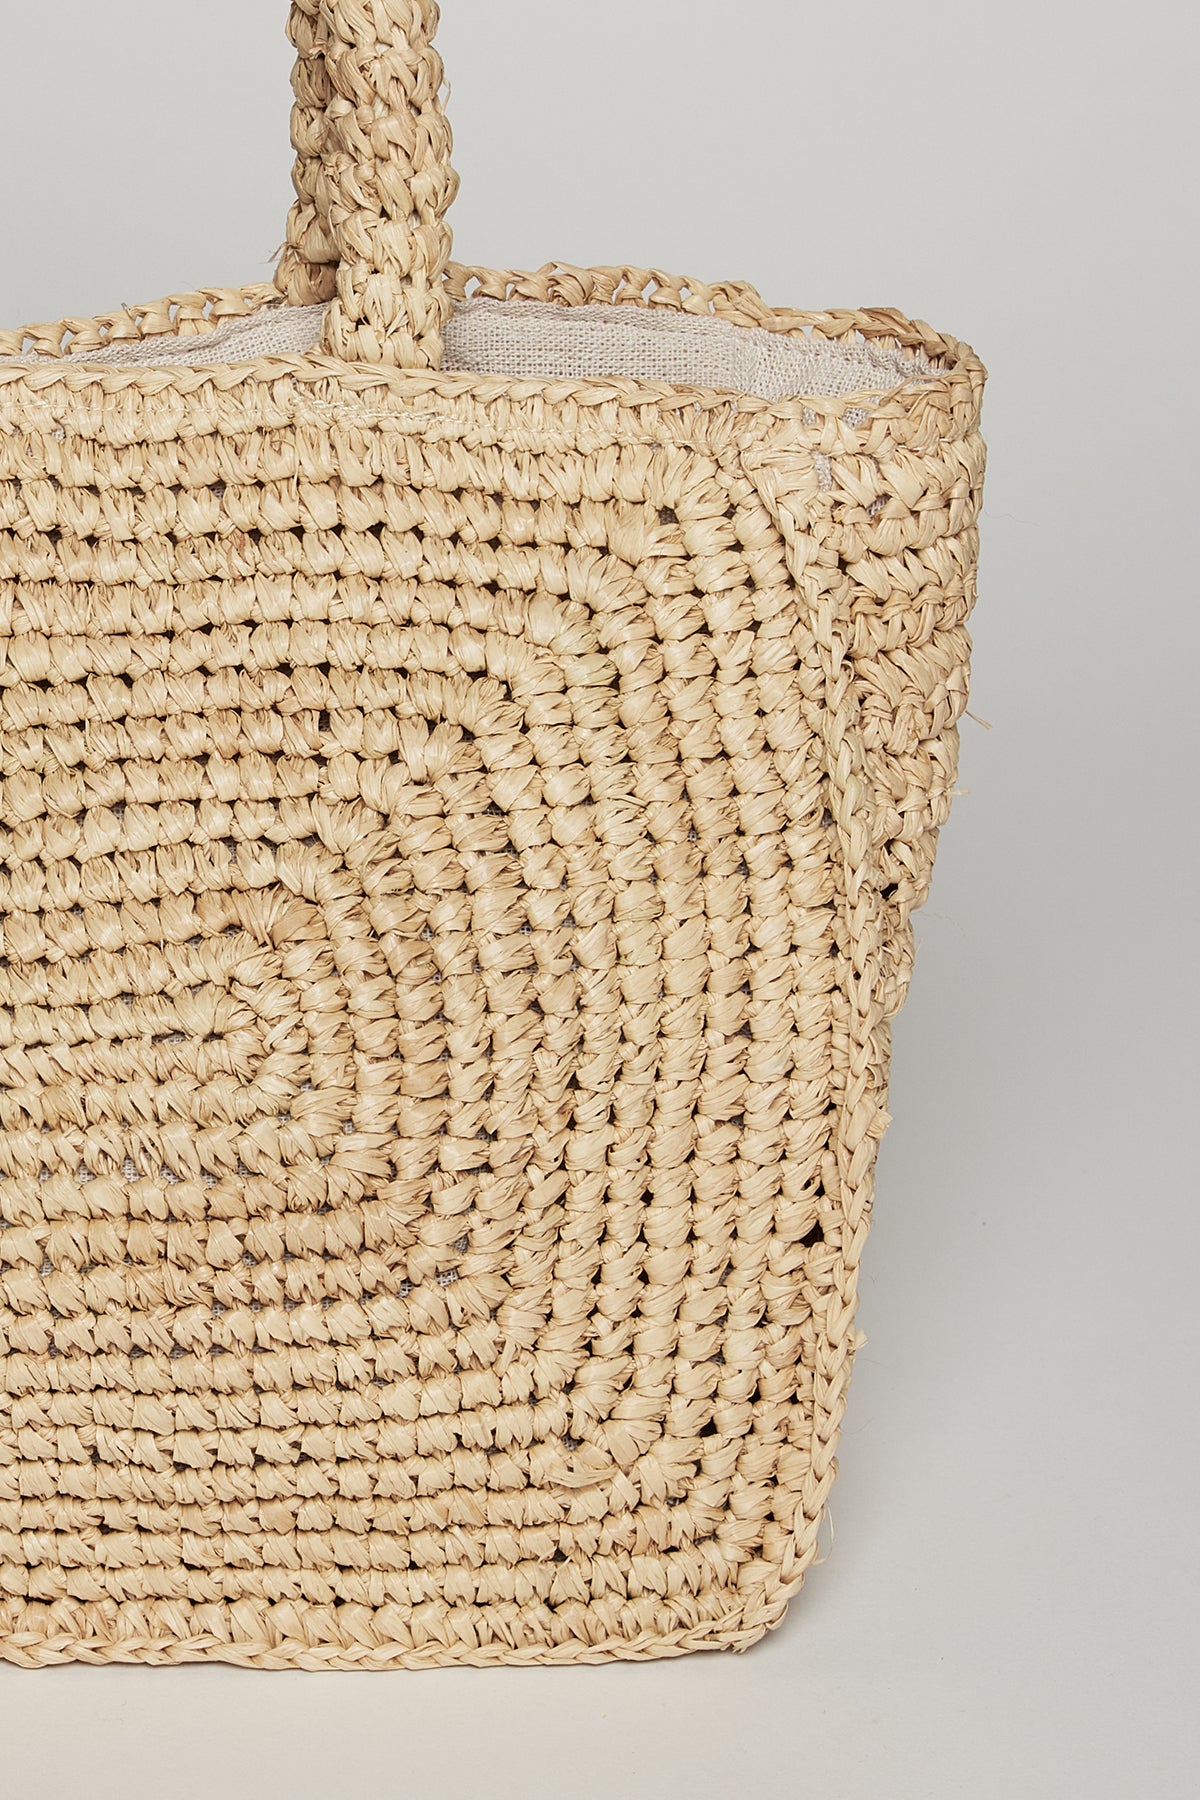   Close-up of a durable TINA STRAW TOTE BAG with sturdy twisted handles, featuring a detailed spiral pattern and texture by Velvet by Graham & Spencer. 